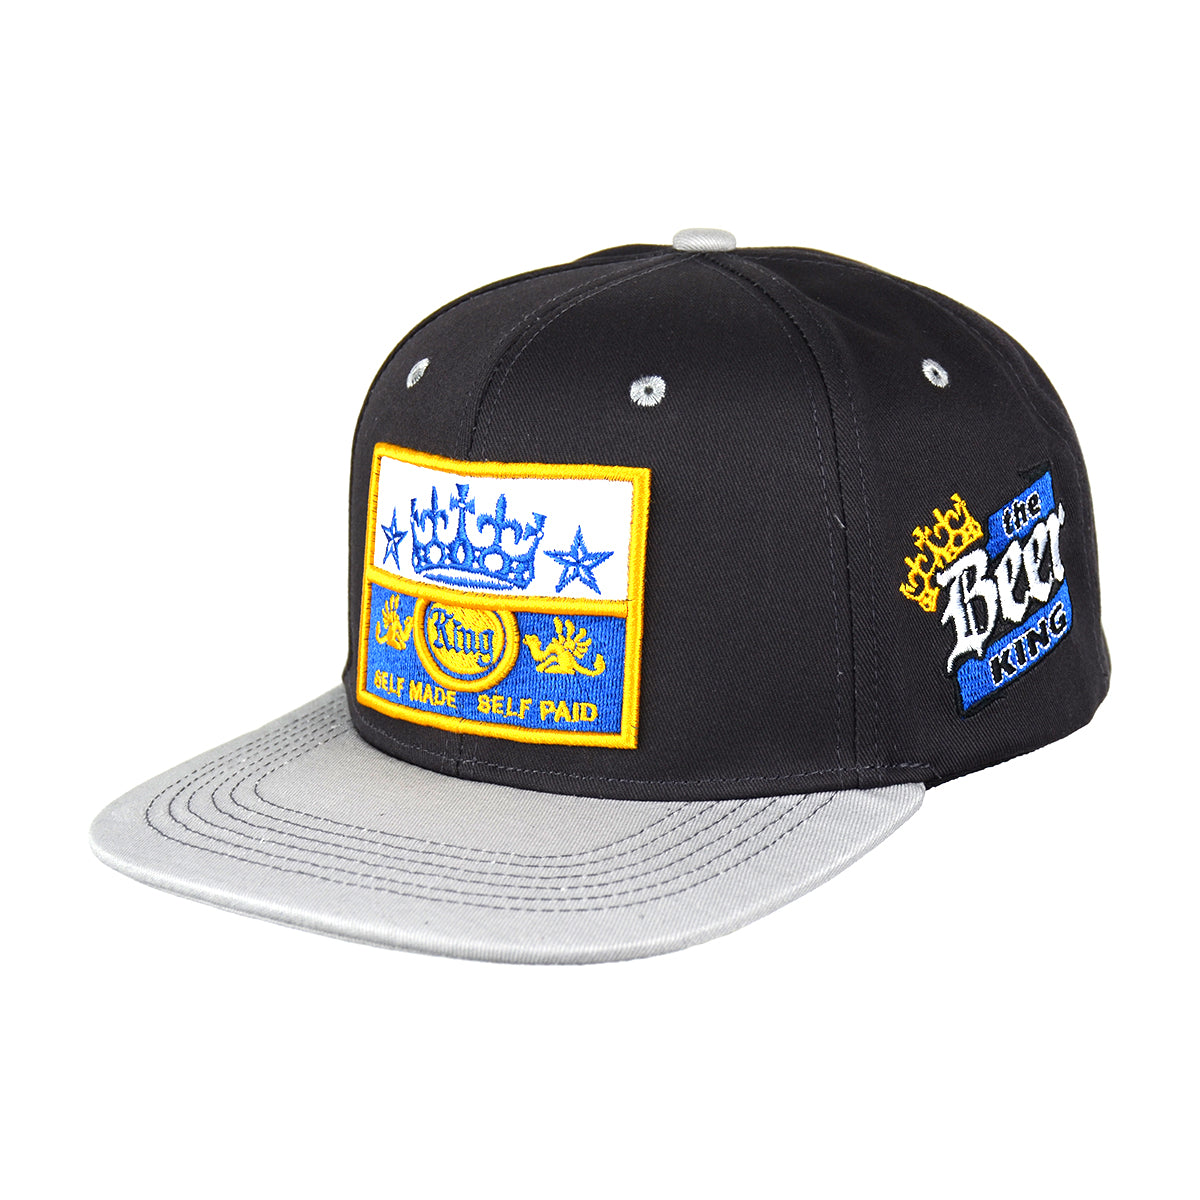 Snapback "The Beer King" Hat Embroidered